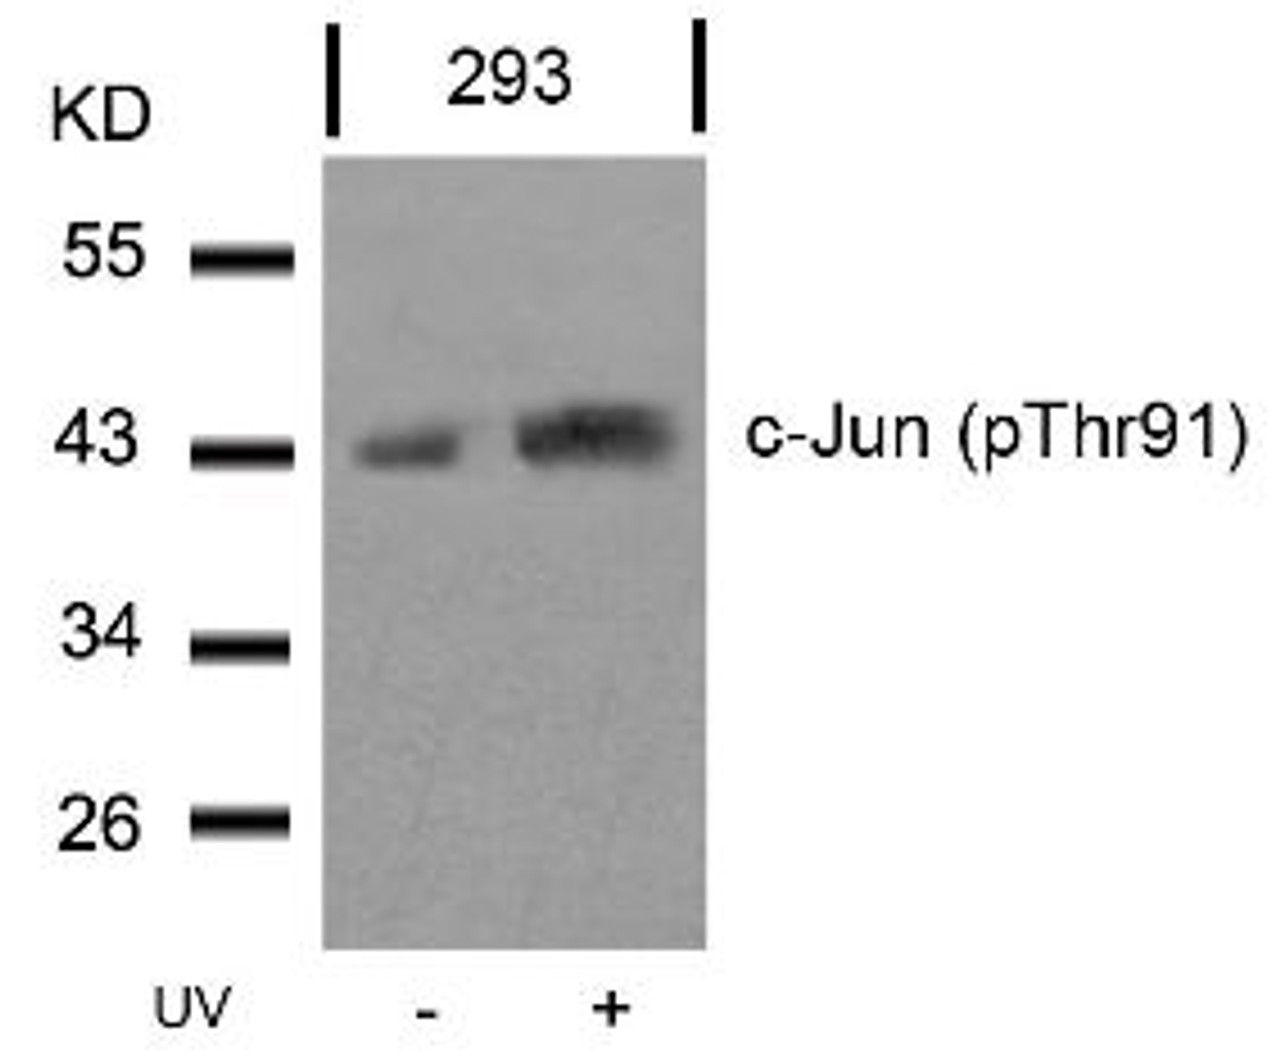 Western blot analysis of lysed extracts from 293 cells untreated or treated with UV using c-Jun (Phospho-Thr91) .